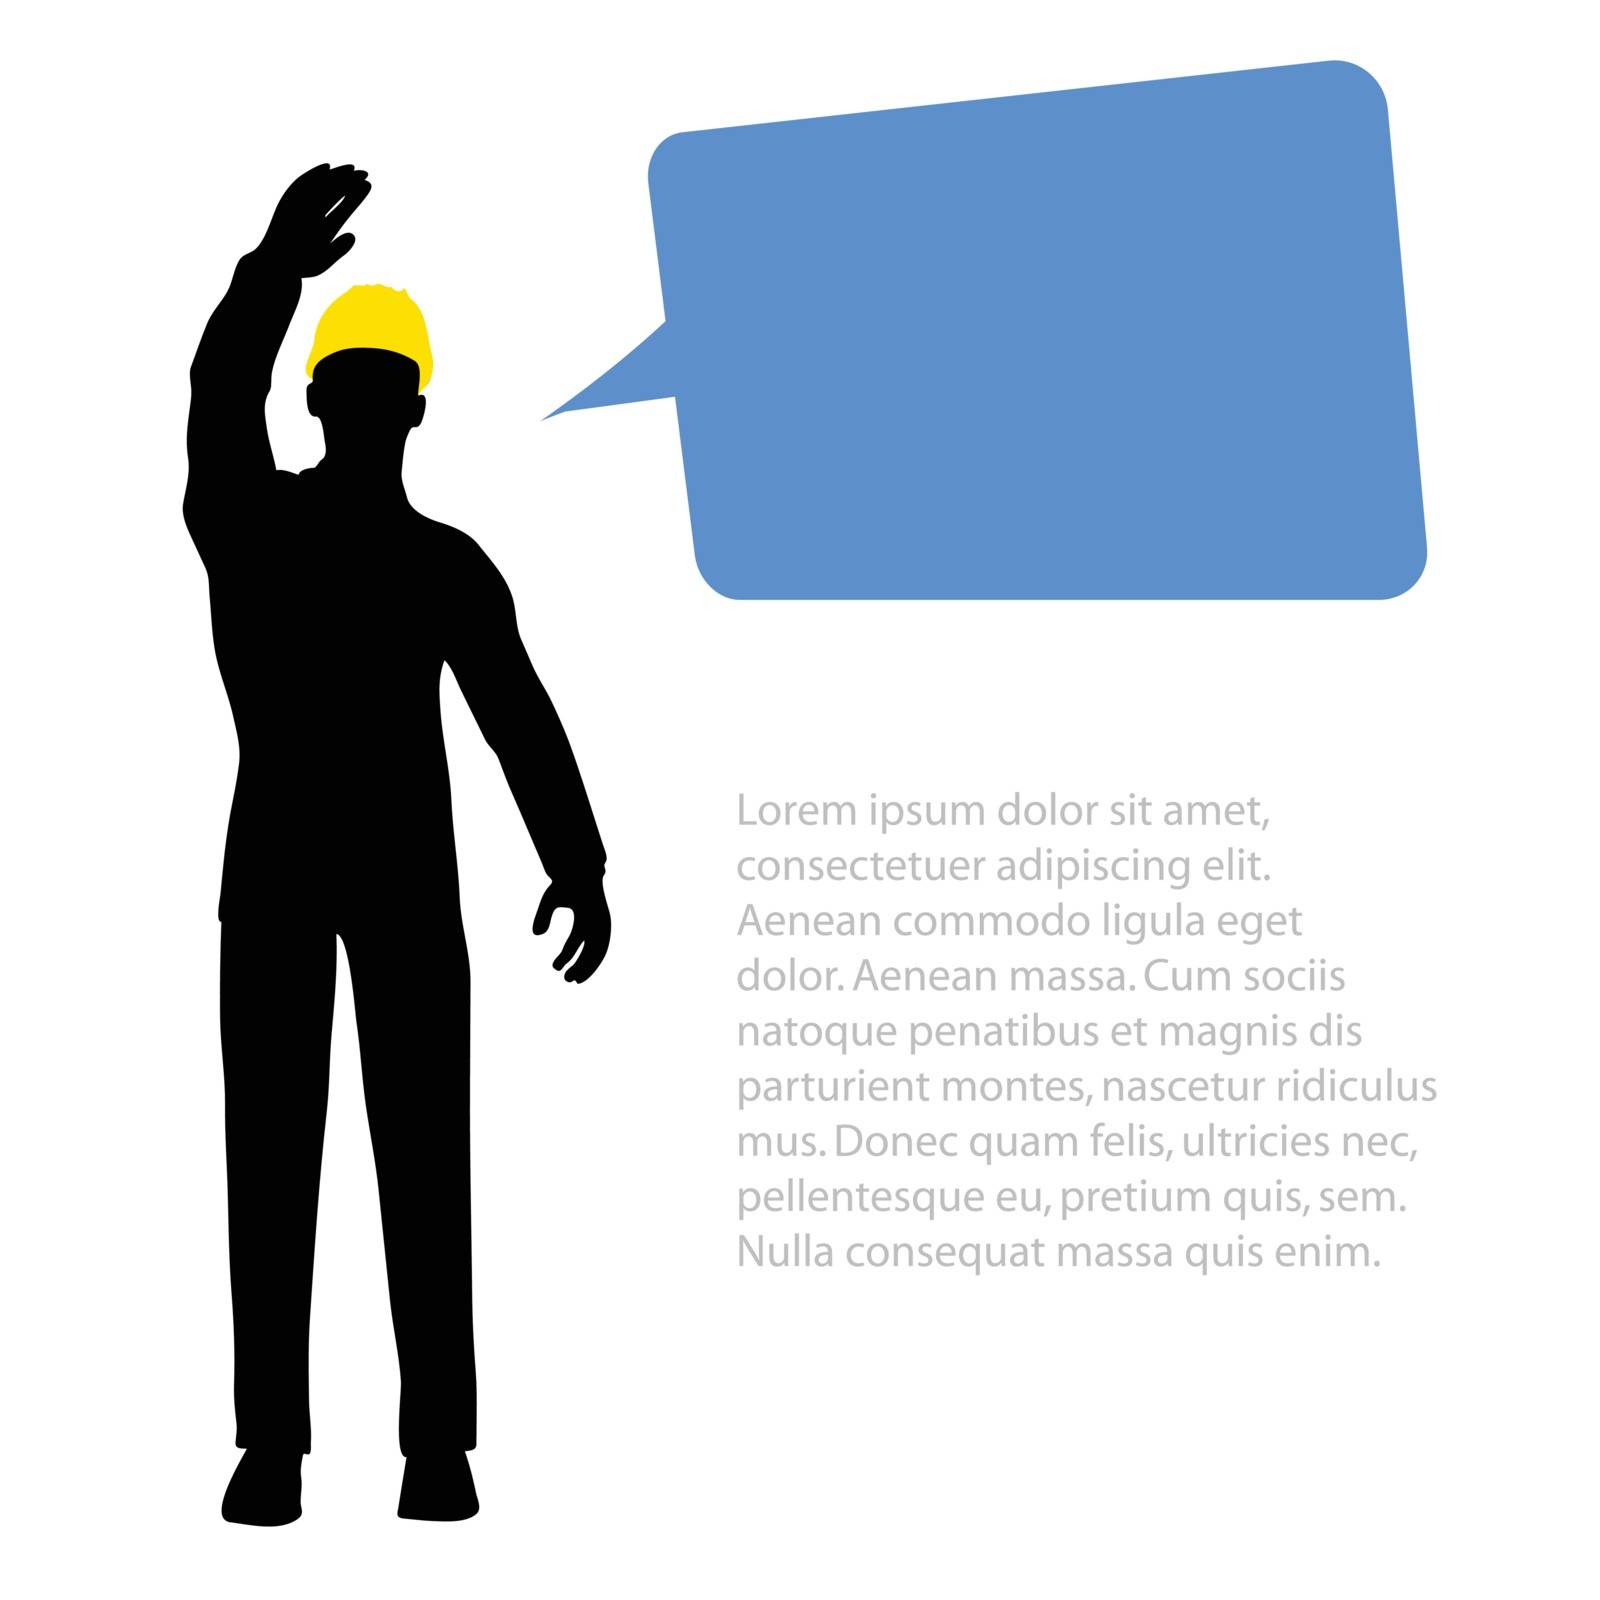 worker silhouette with yellow protective headgear isolated